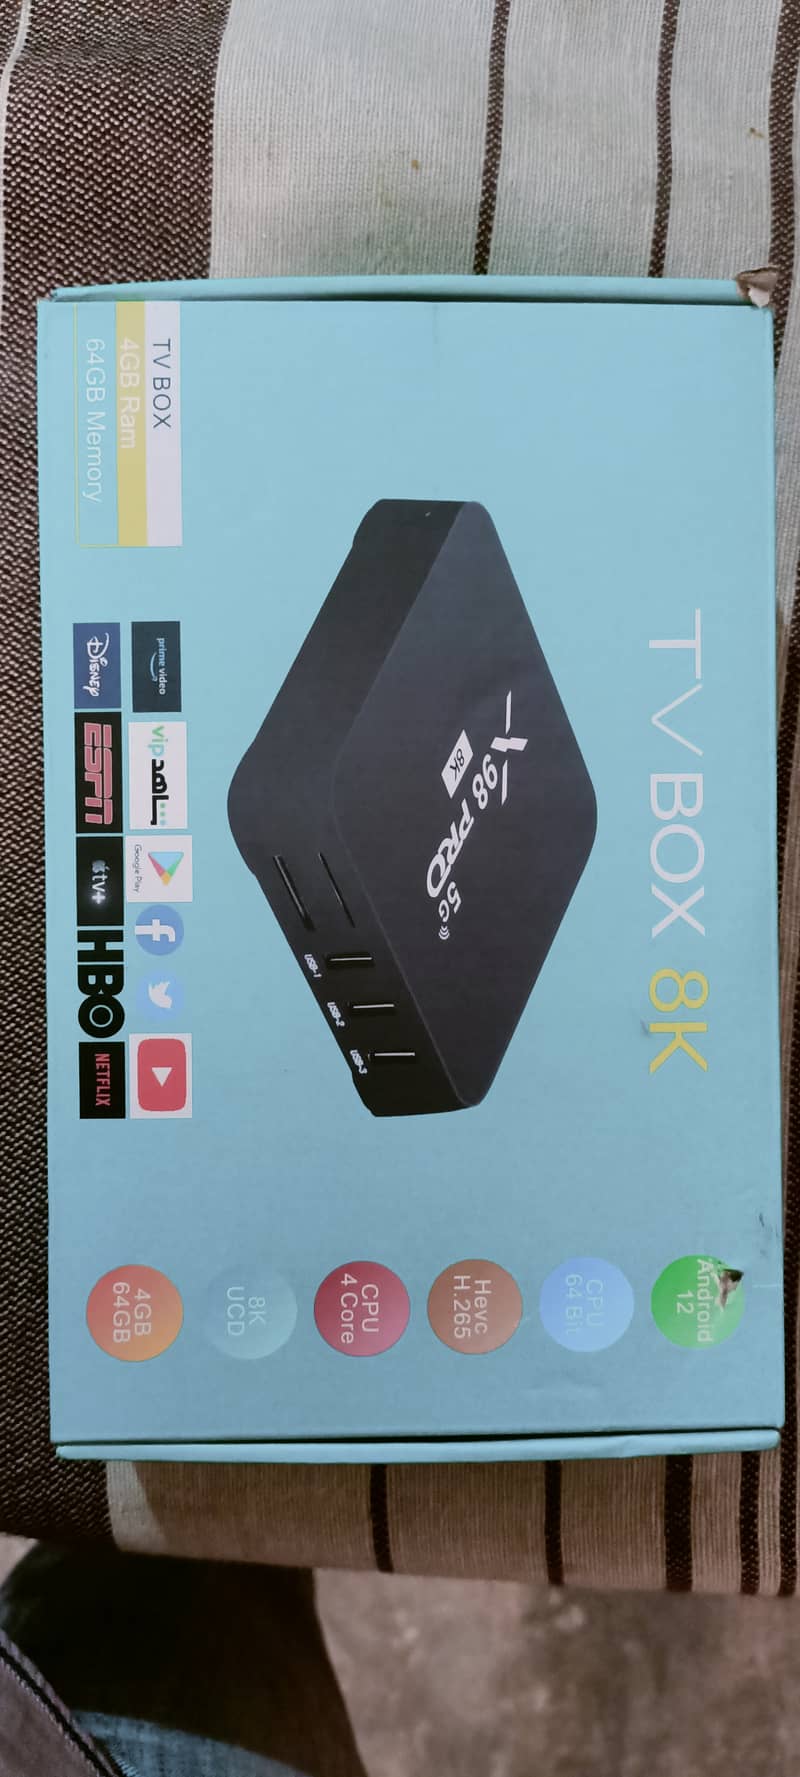 Android Tv Box X98 Pro 0